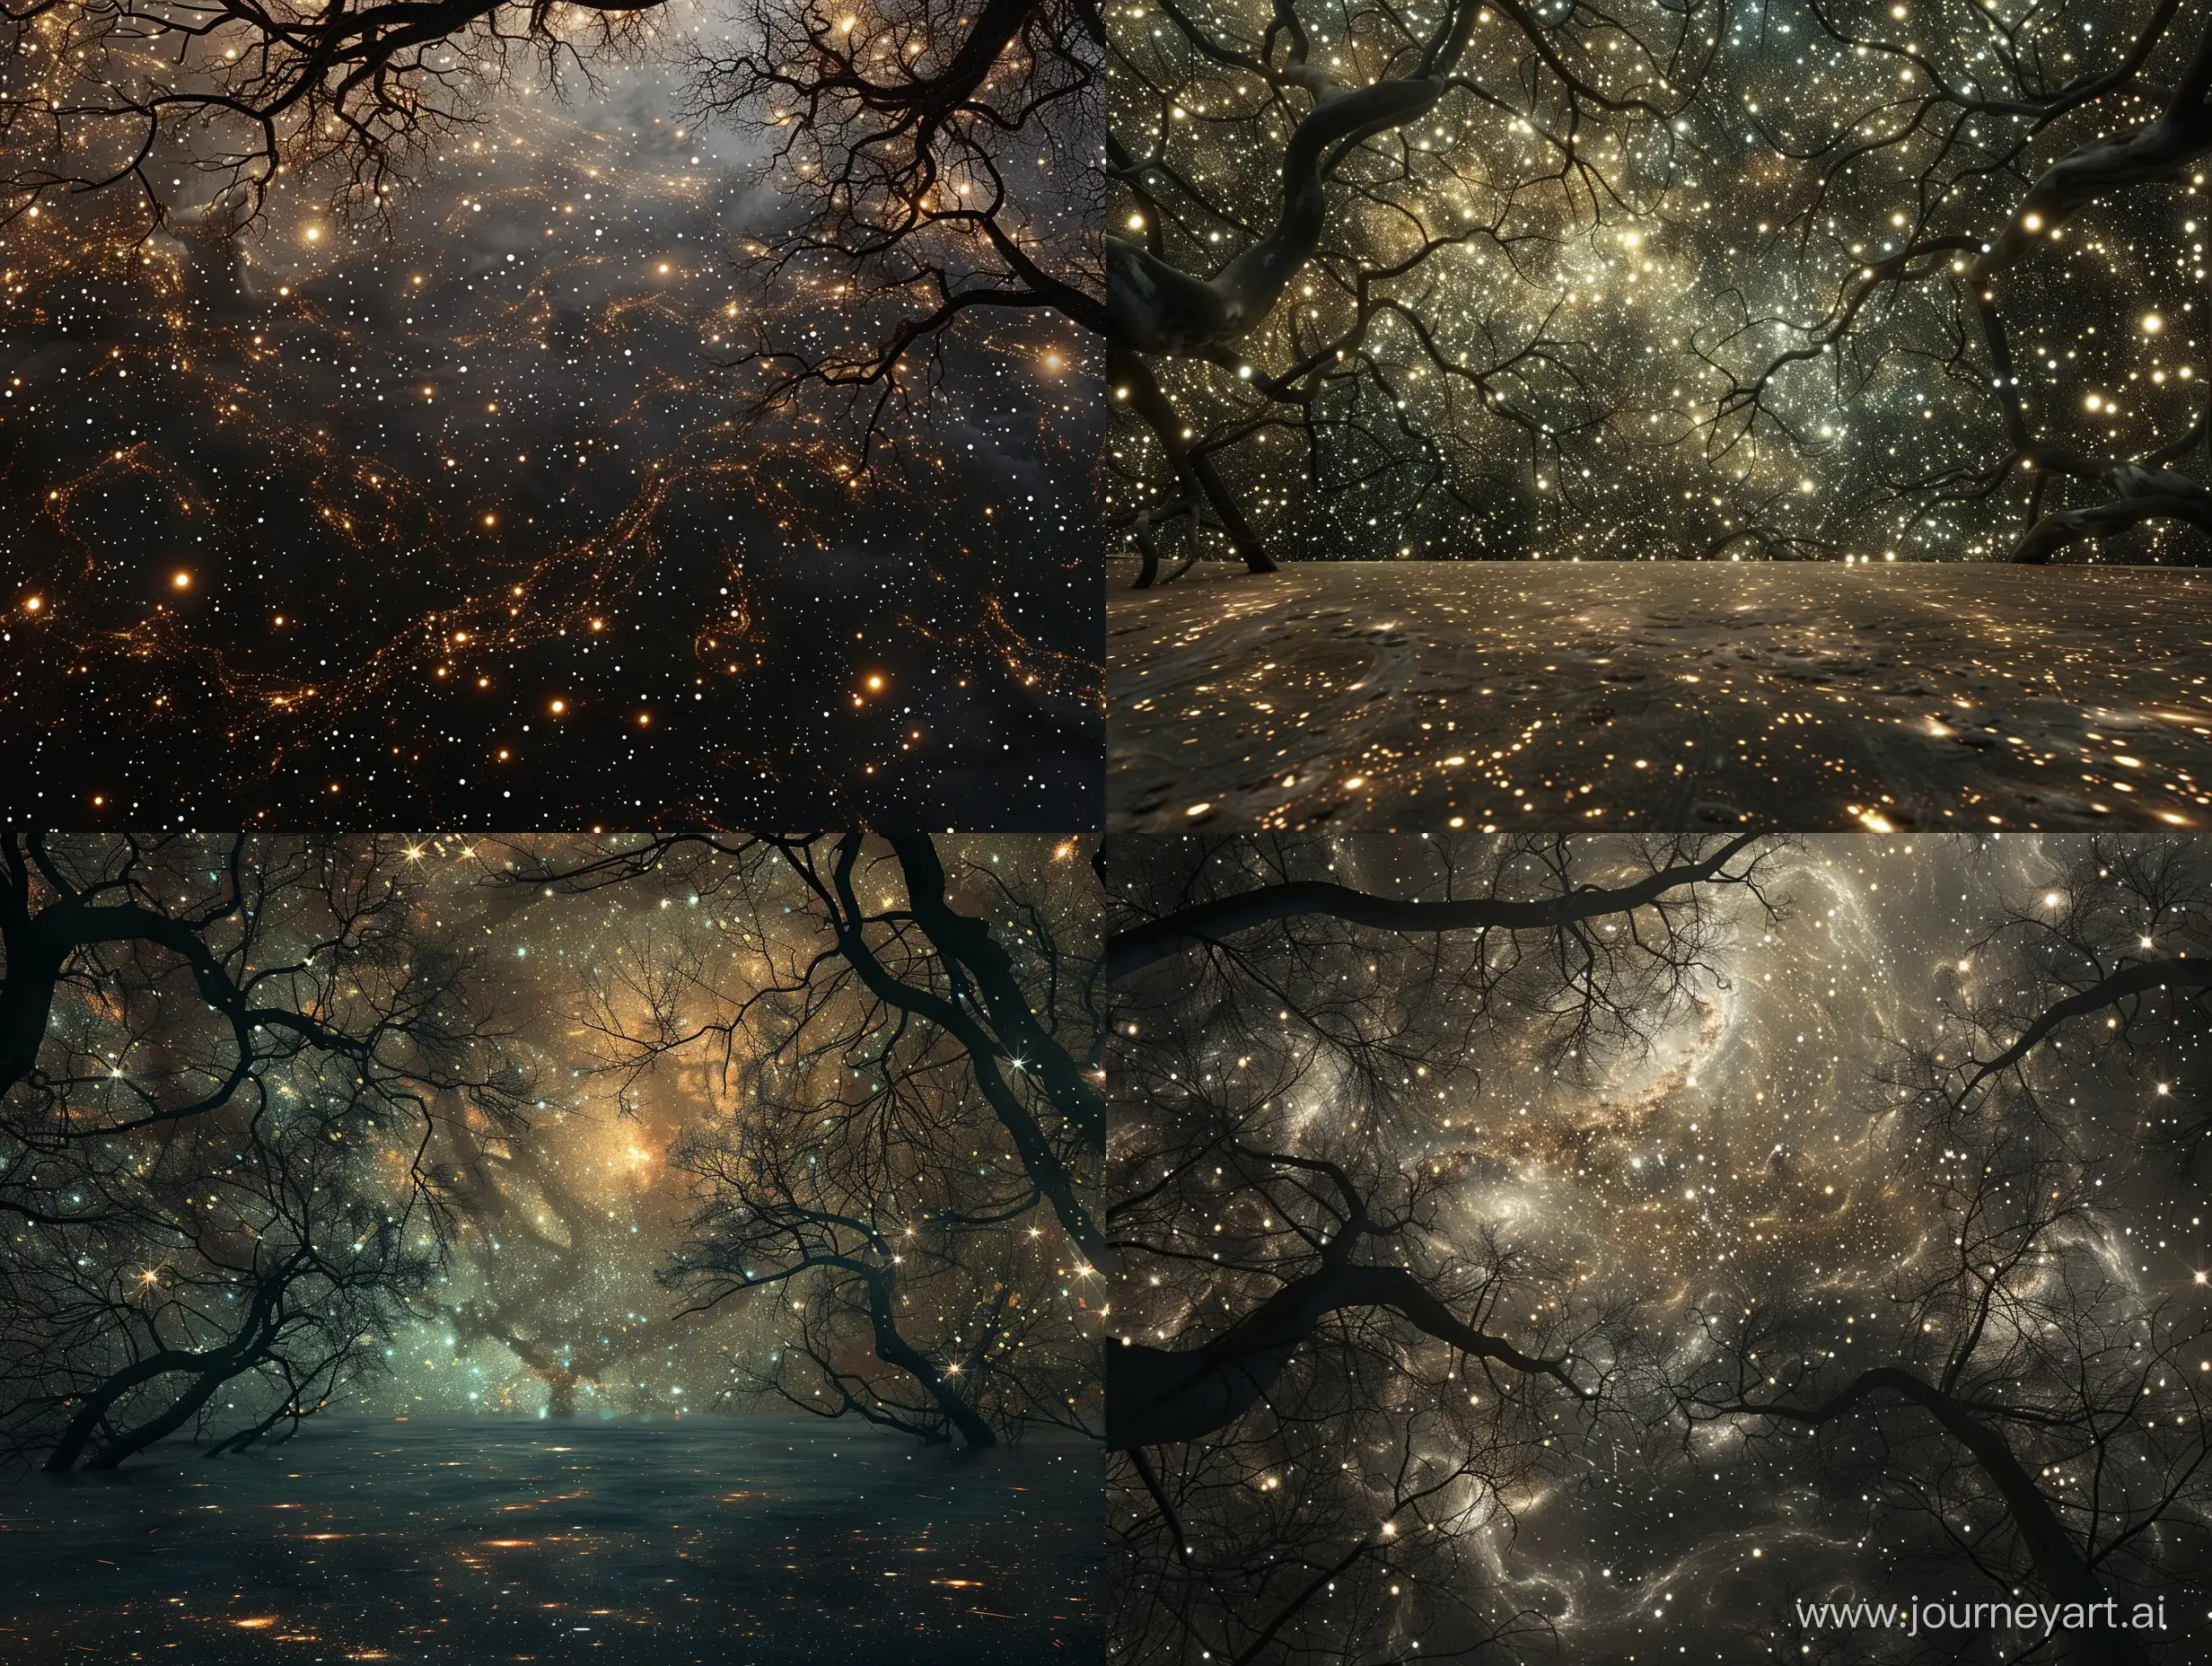 A fantasy landscape, a vast world with many sparkling stars in a large empty space with tree branches running everywhere. Dark colors, the style is photographic